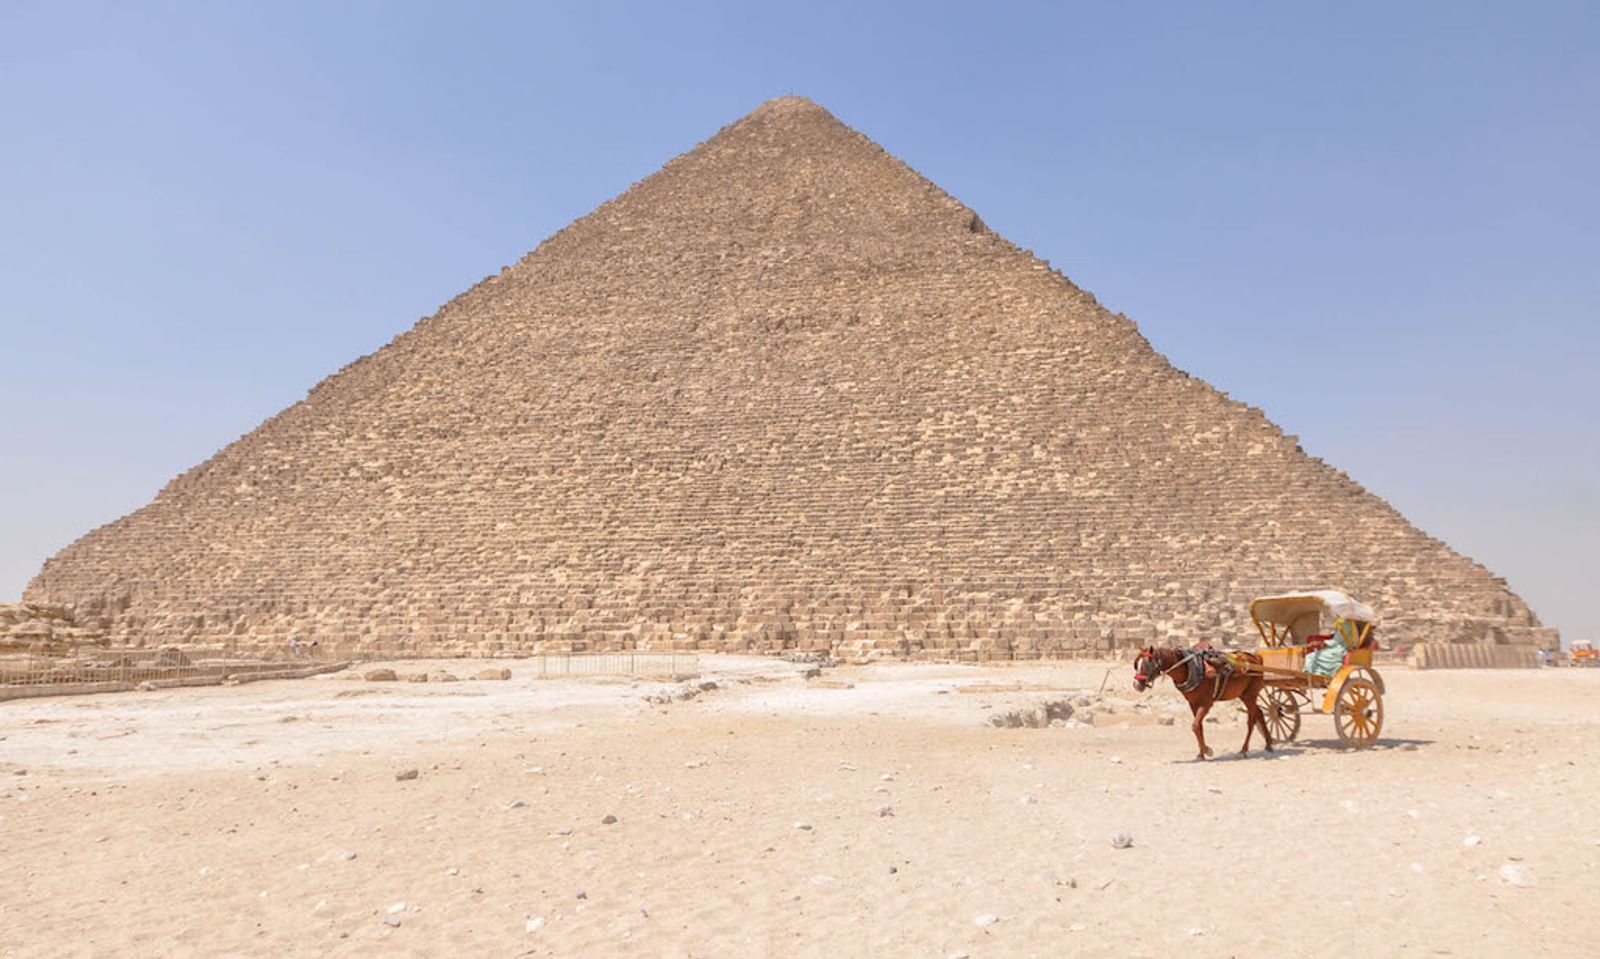 Alleged ‘Porn’ Video Shot on Top of Great Pyramid May Be a Fake